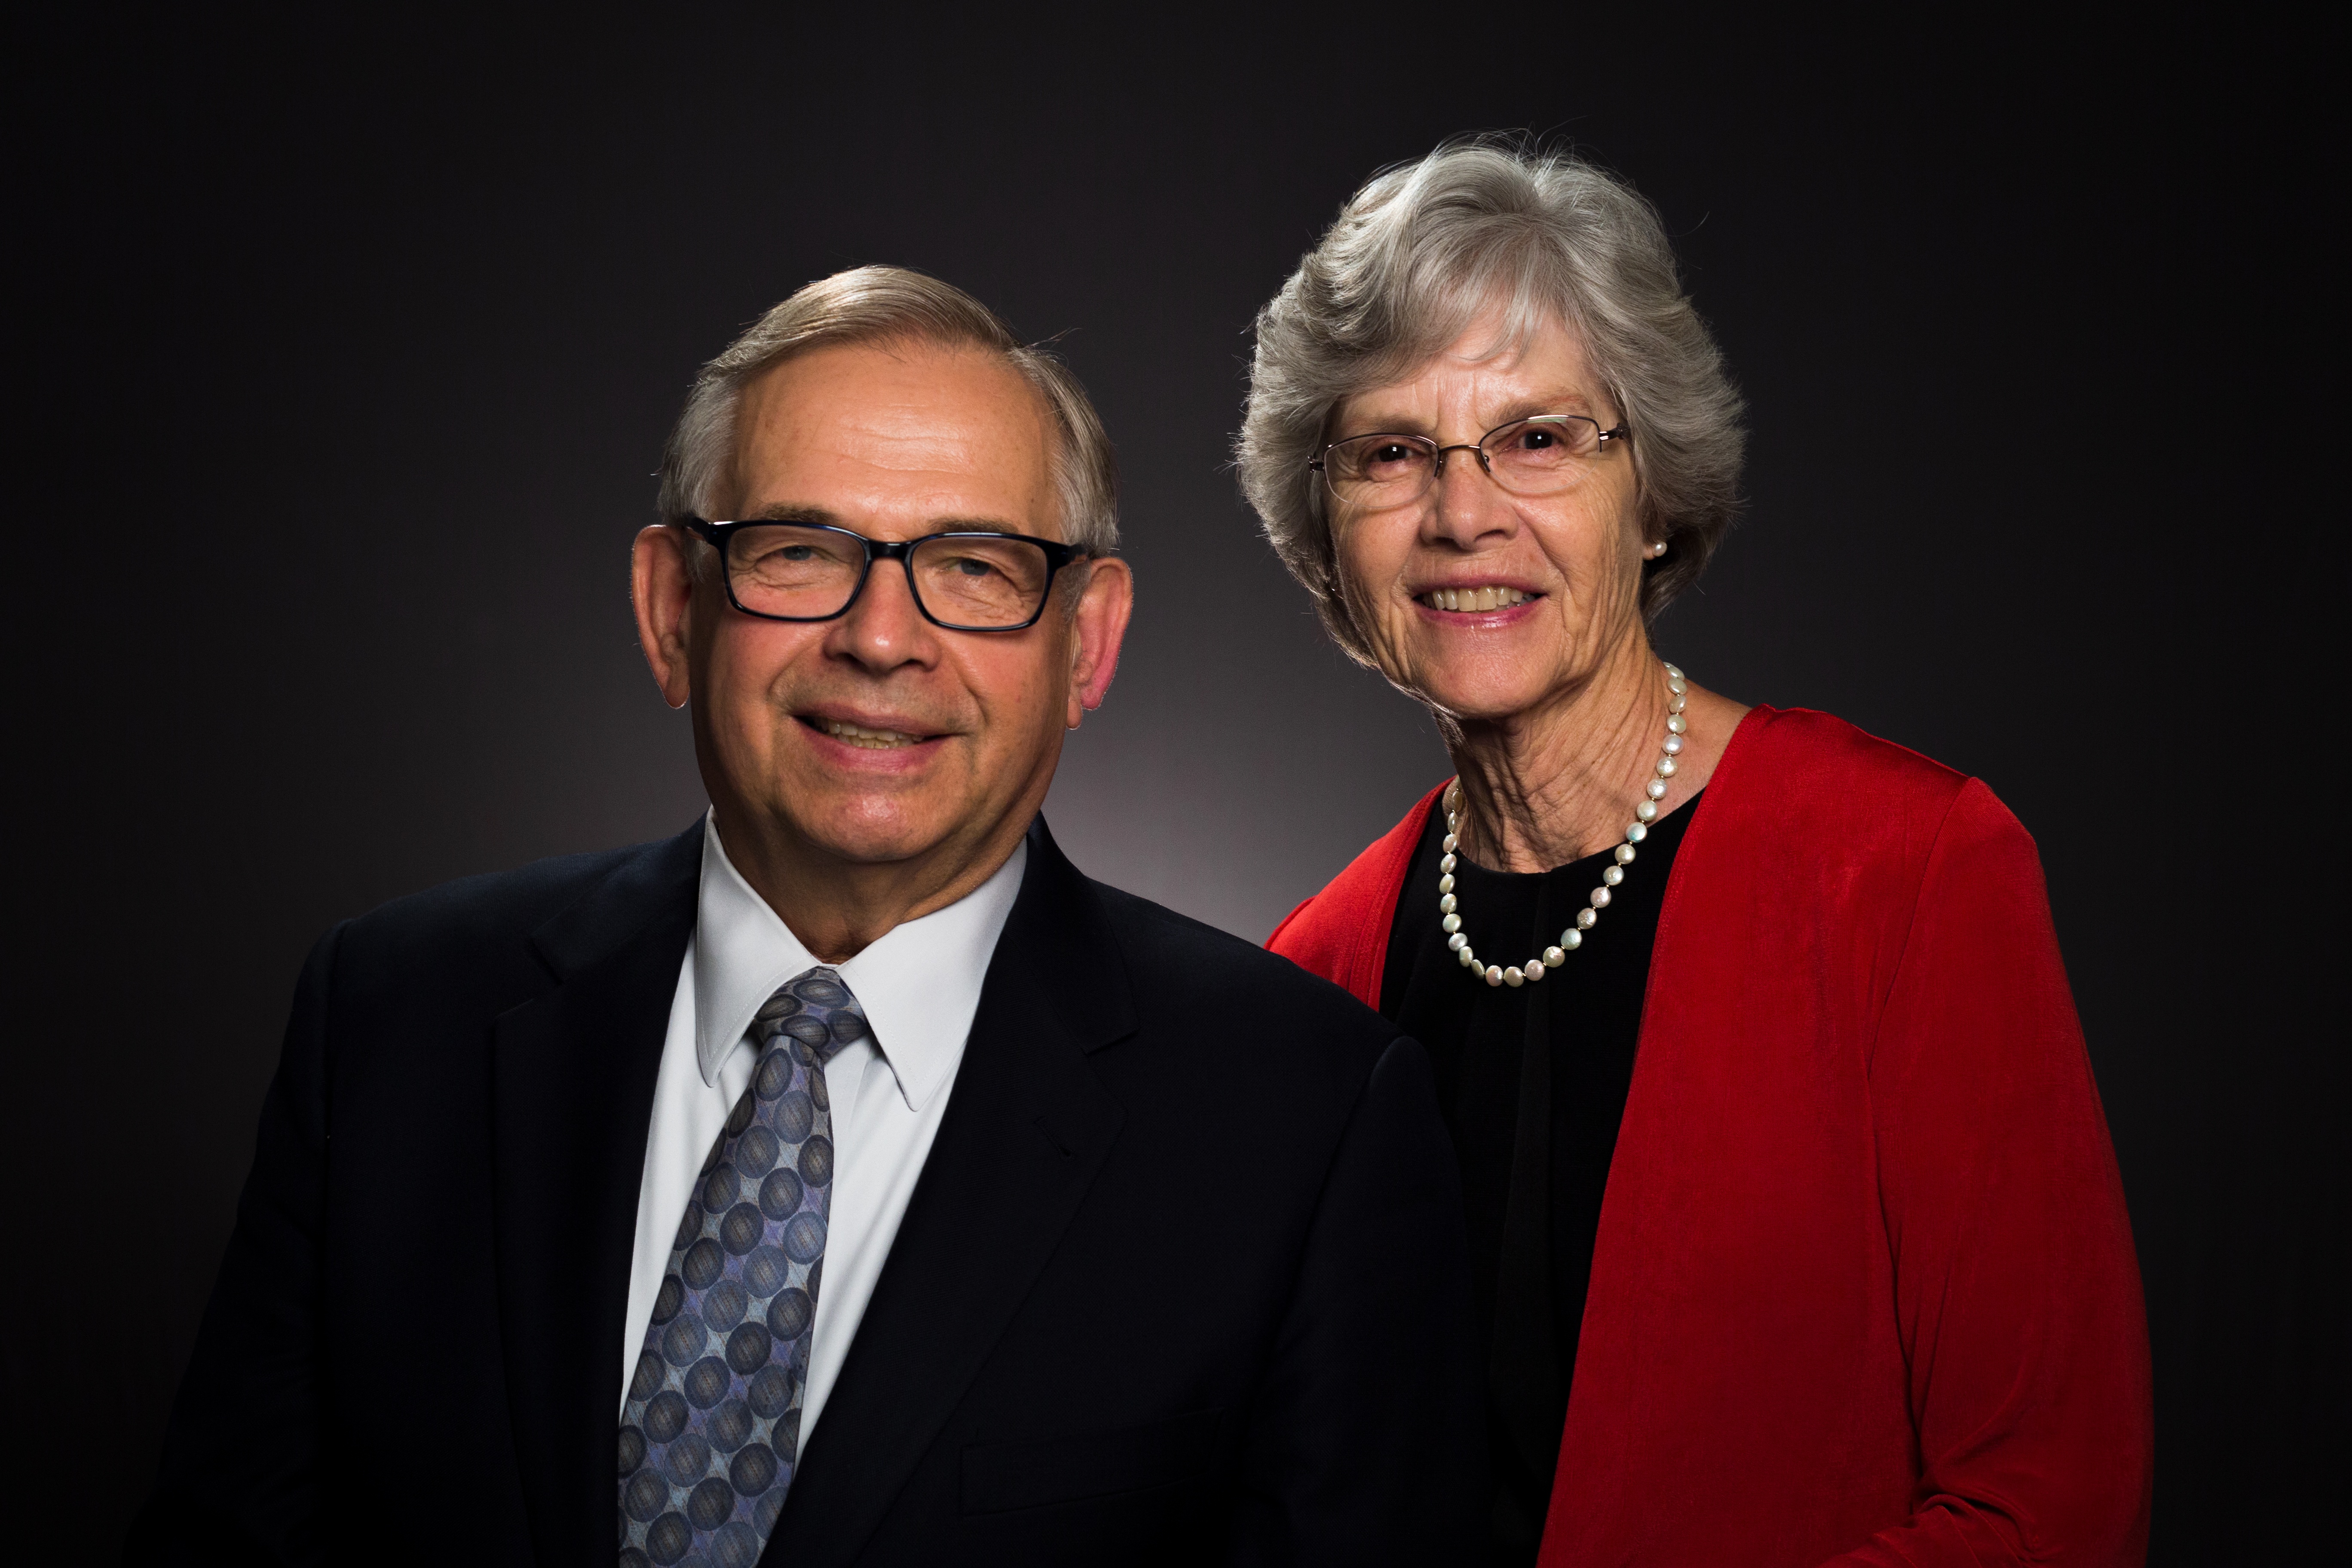 "God willing, Bev and I plan to remain active in the ministry, as well as our work in Ukraine and elsewhere through LifeNets. I plan to continue podcasting, writing and teaching. So this is not 'goodbye.'”